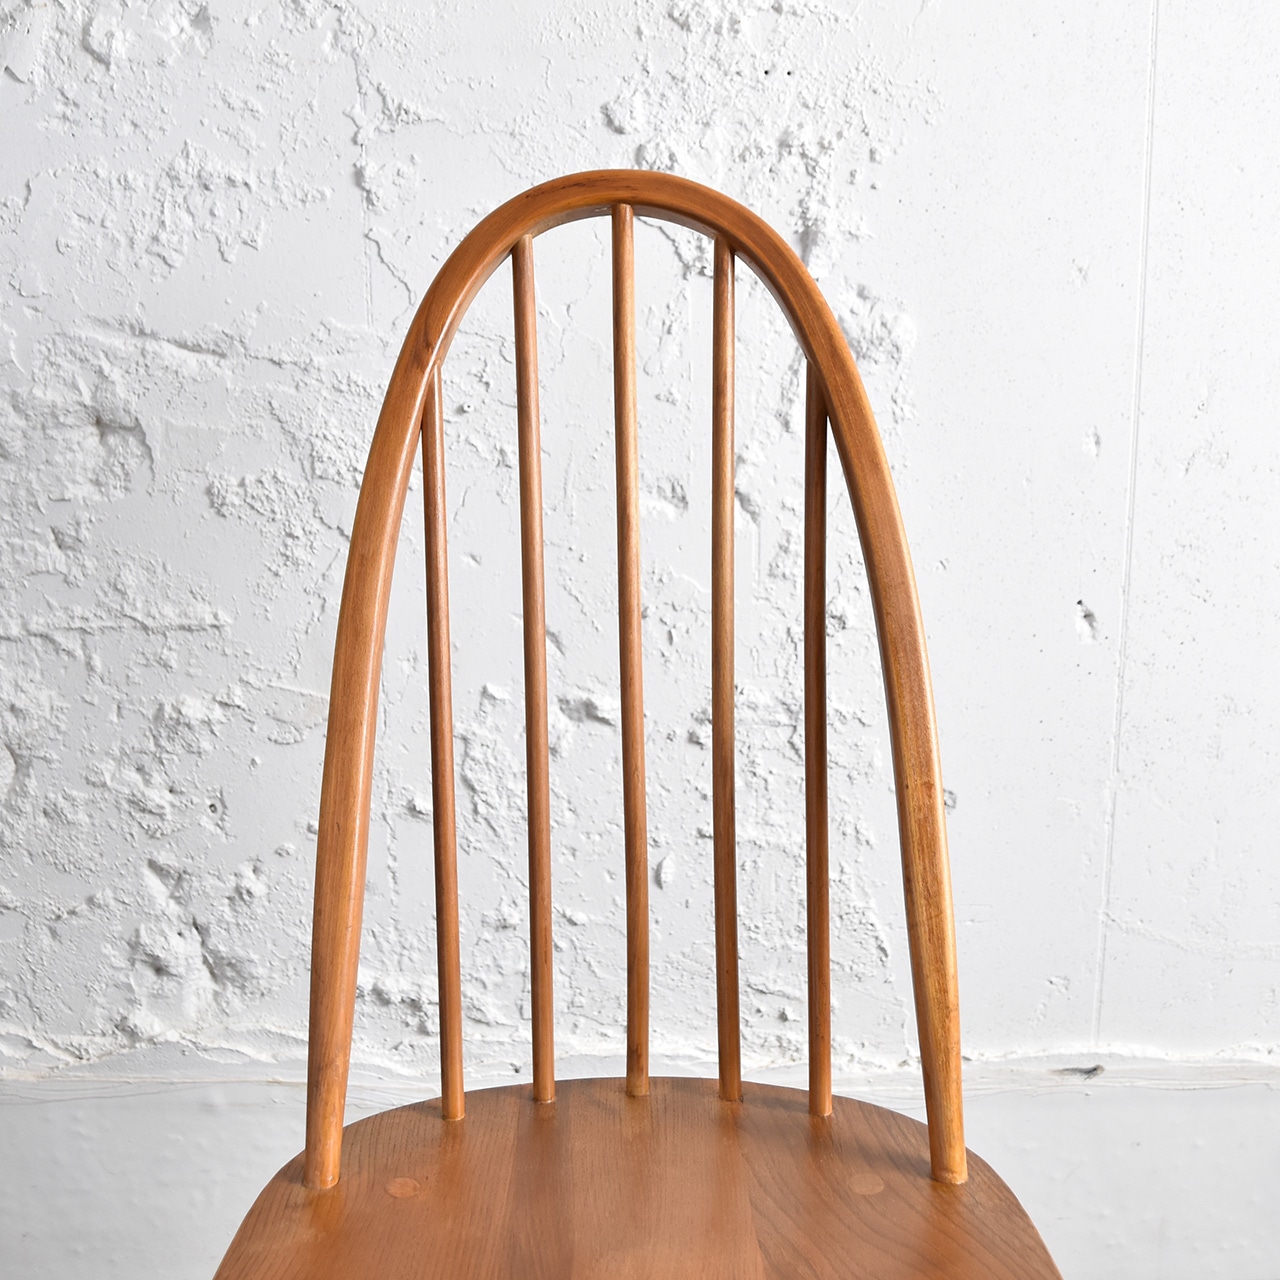 Ercol Quaker Chair / アーコール クエーカー チェア / 2106BNS-004